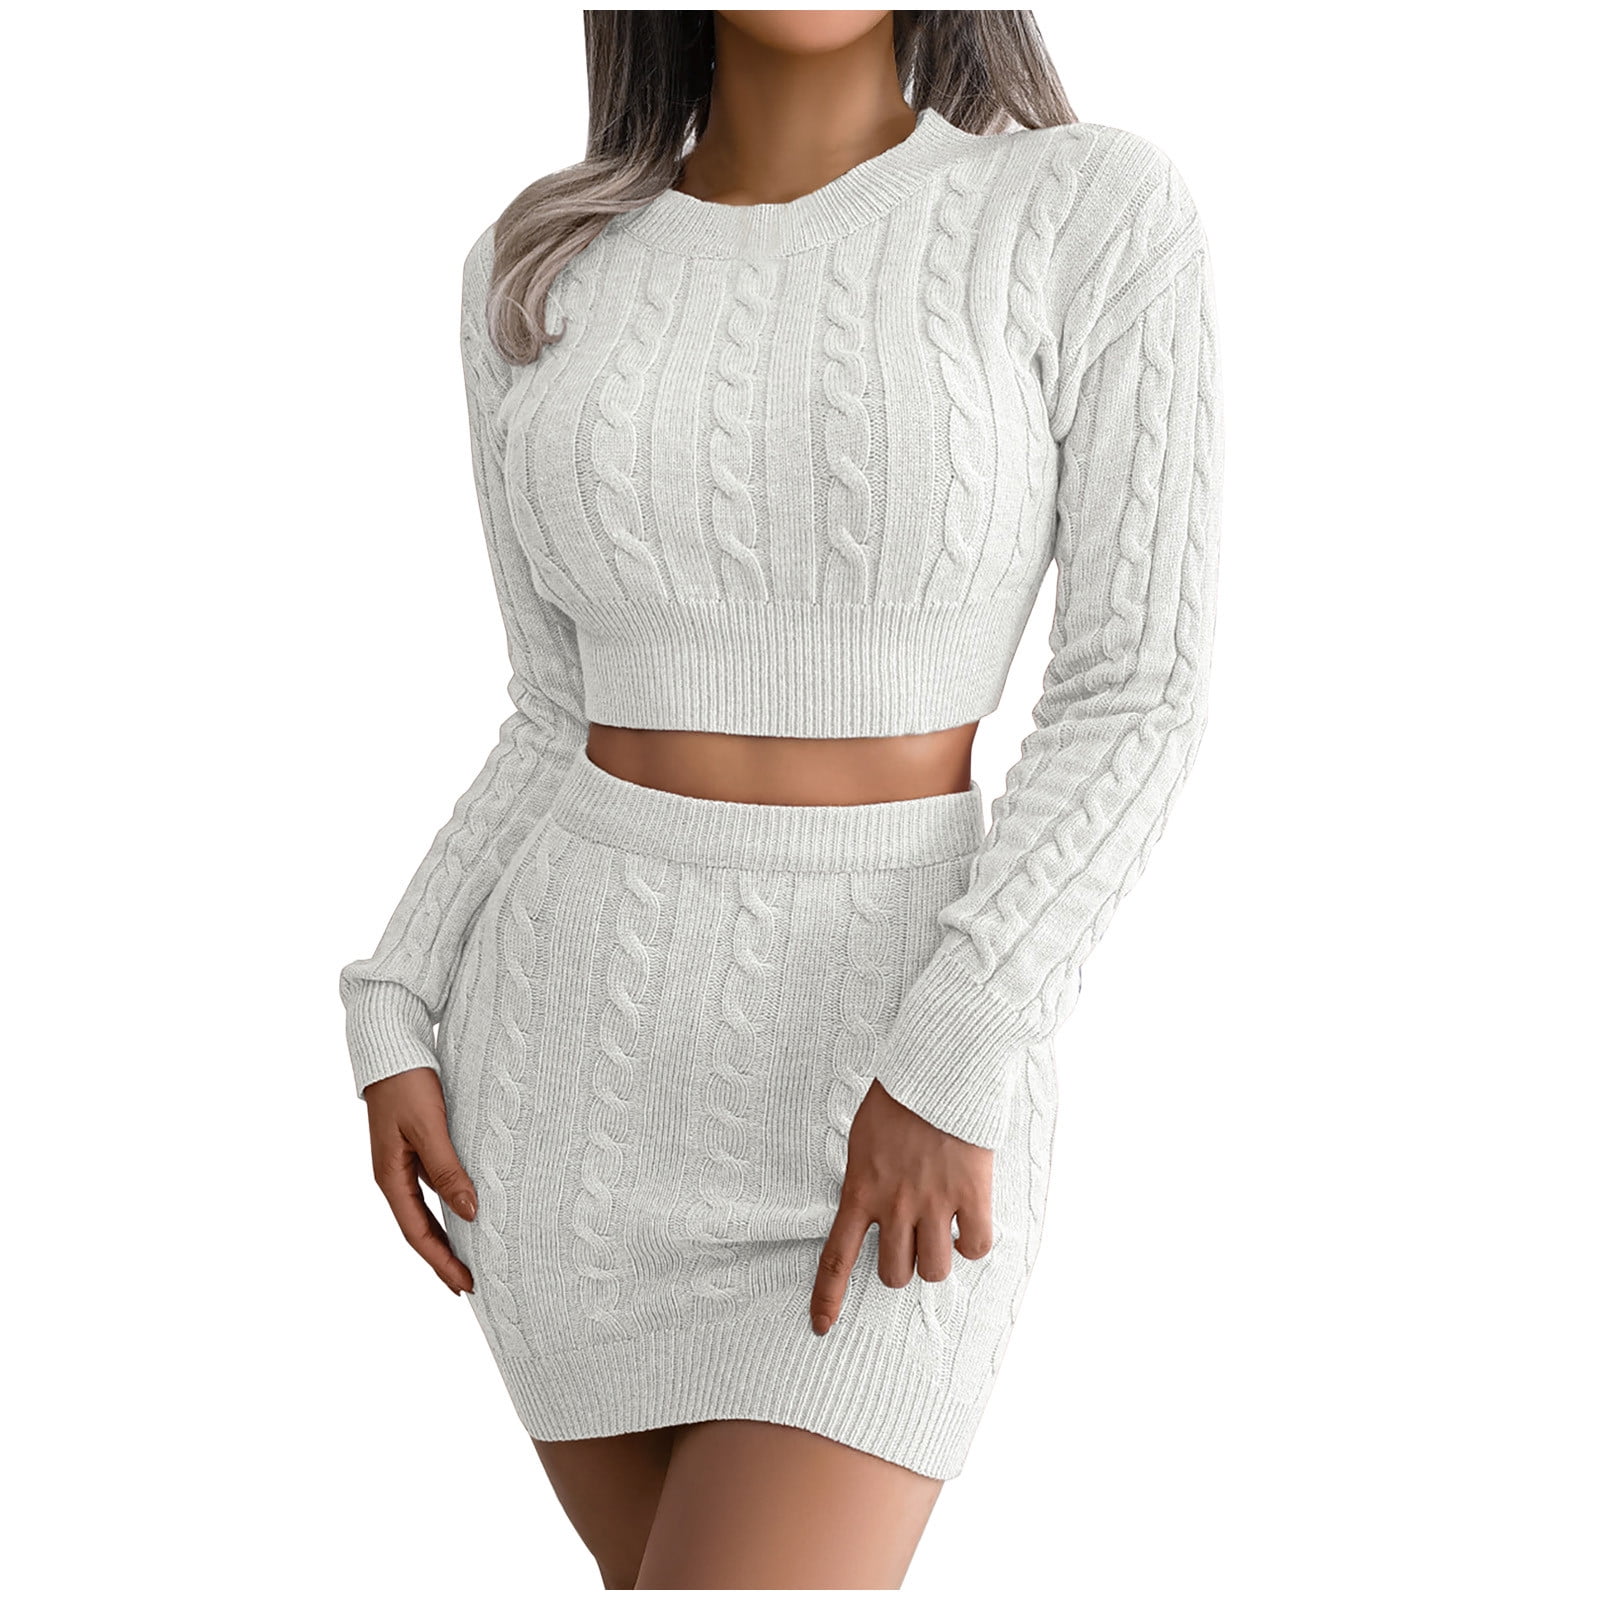 Women Rib Knitted Beachwear Skirt Two Piece Set Solid Short Sleeve Crop Tops  T-Shirt Mini Skirt Outfit Party Club Matching Sets